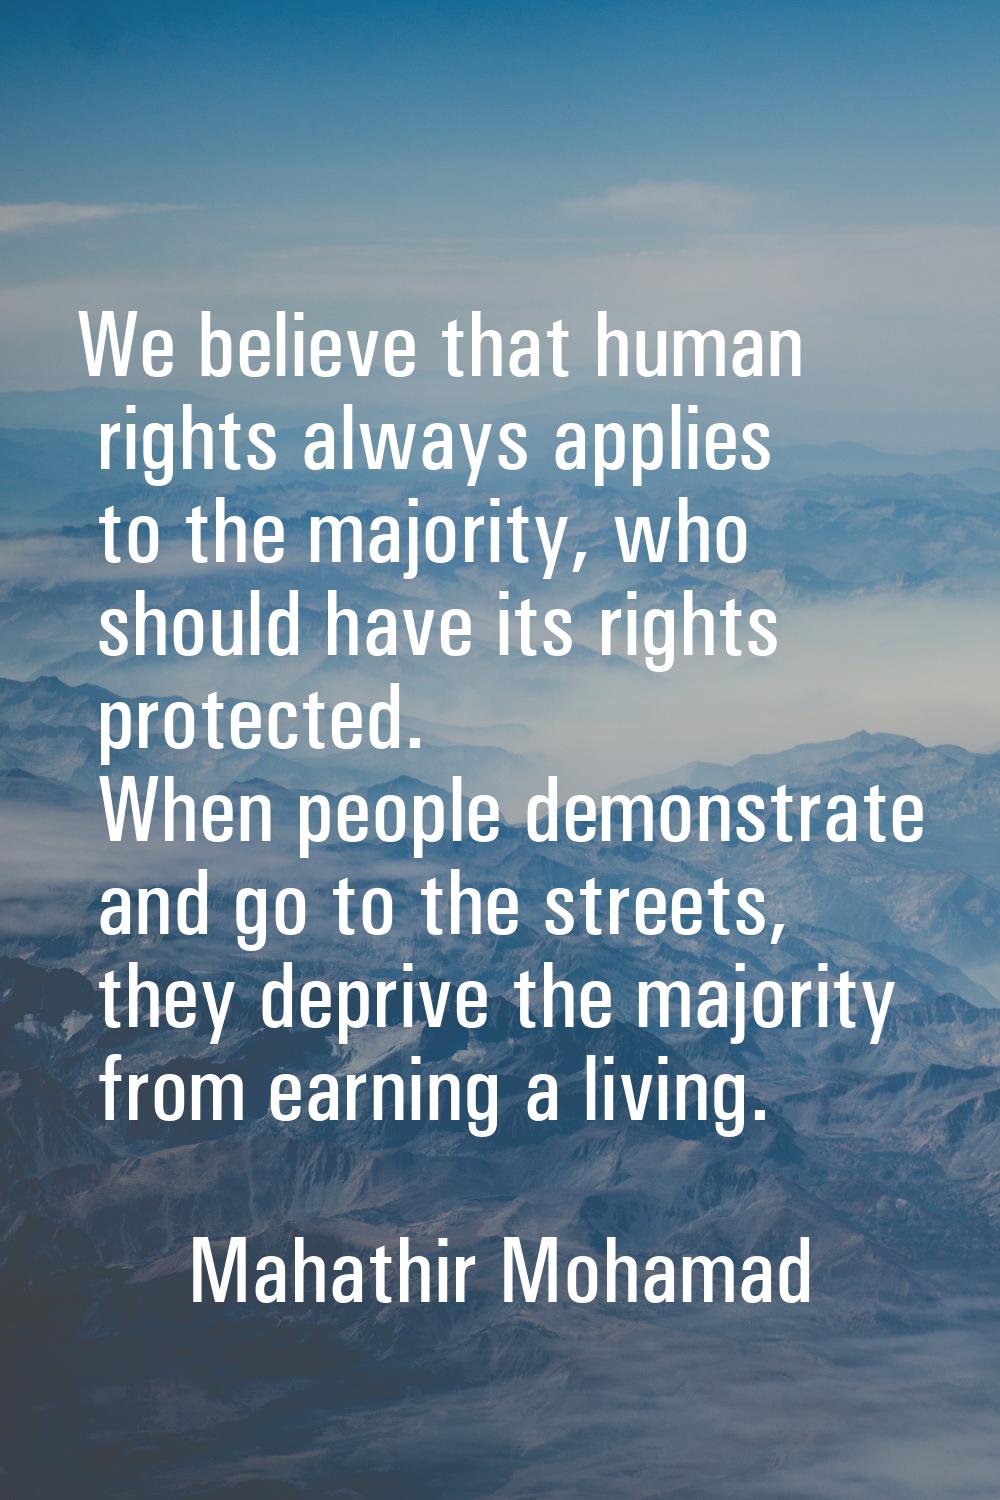 We believe that human rights always applies to the majority, who should have its rights protected. 